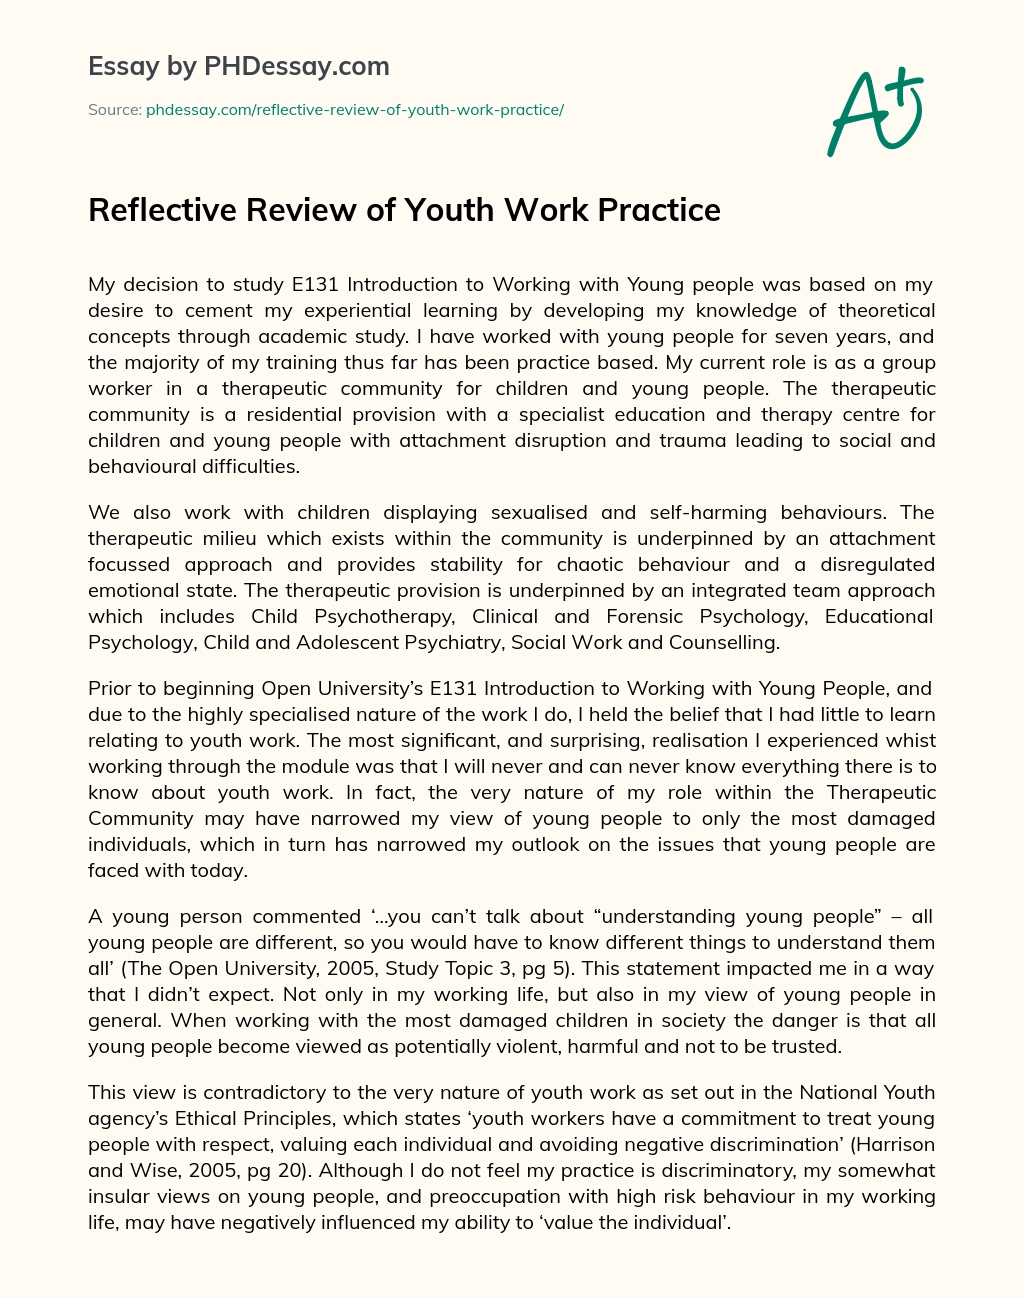 Reflective Review of Youth Work Practice essay